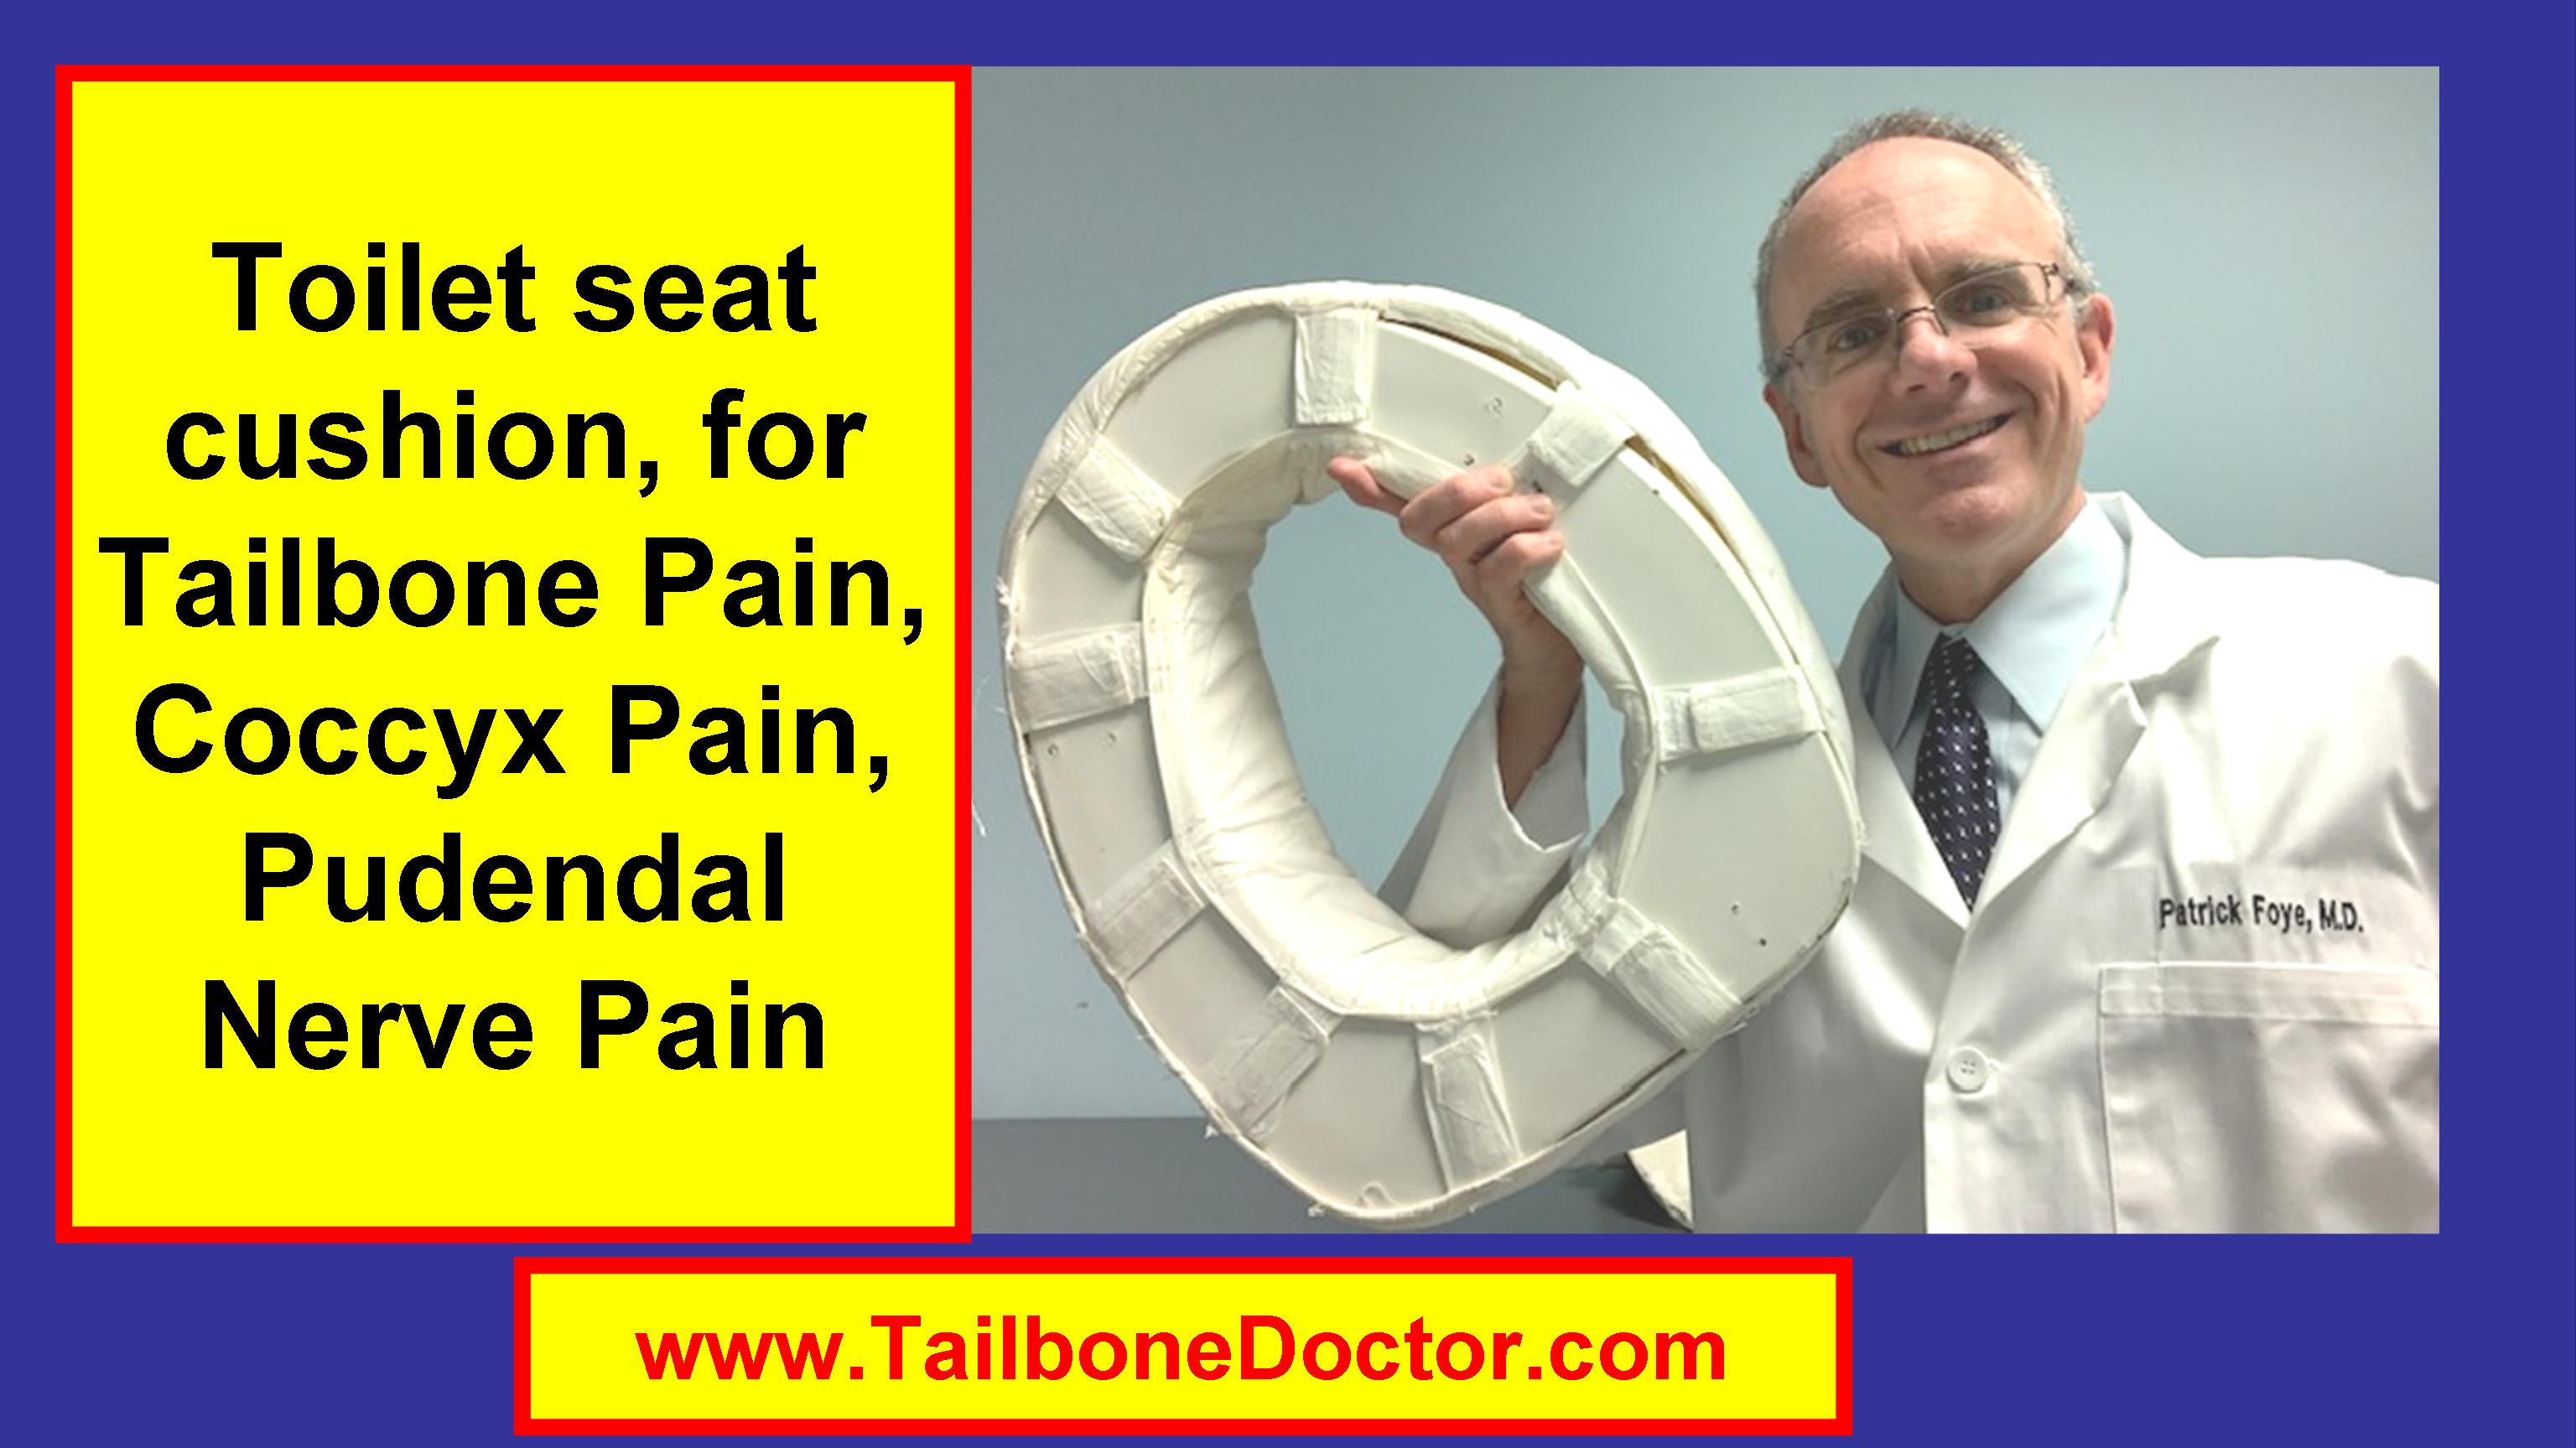 https://tailbonedoctor.com/wp-content/uploads/2019/04/Toilet-seat-cushion-Dr-Foye-for-Tailbone-Pain-Coccyx-Pain-Pudendal-Nerve-Pain-.jpg